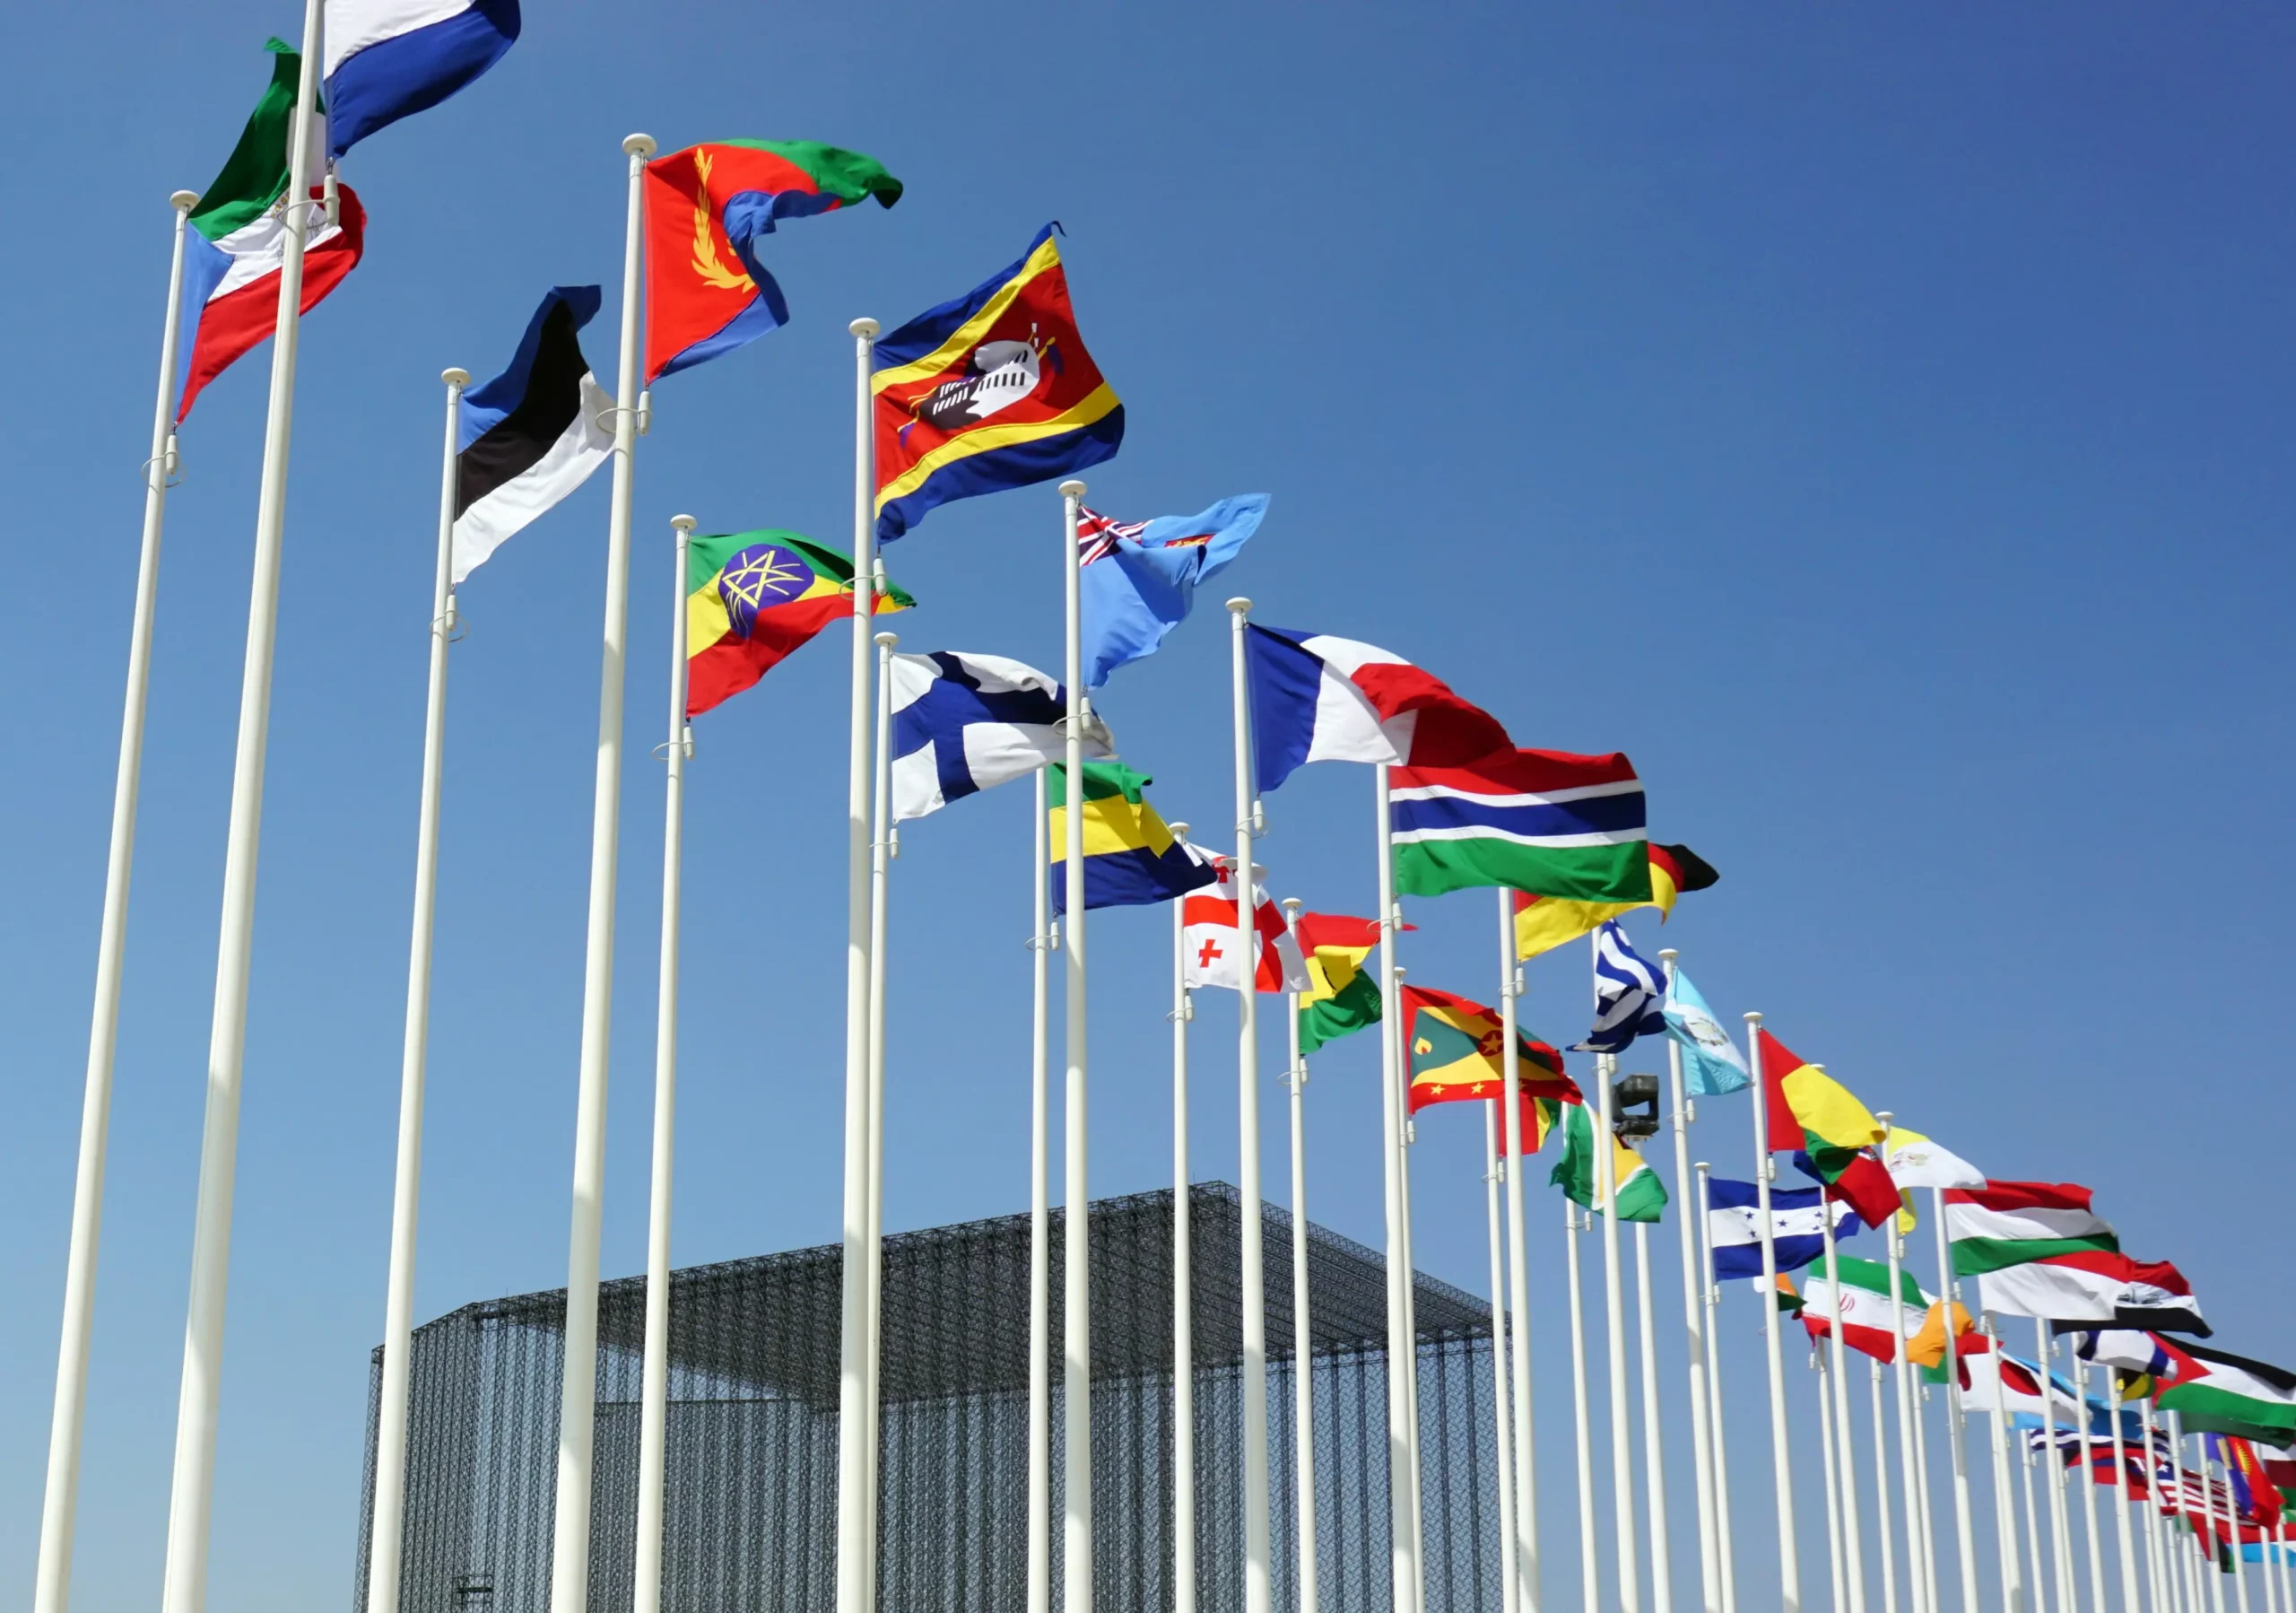 Many flags representing different nations and cultures with unity